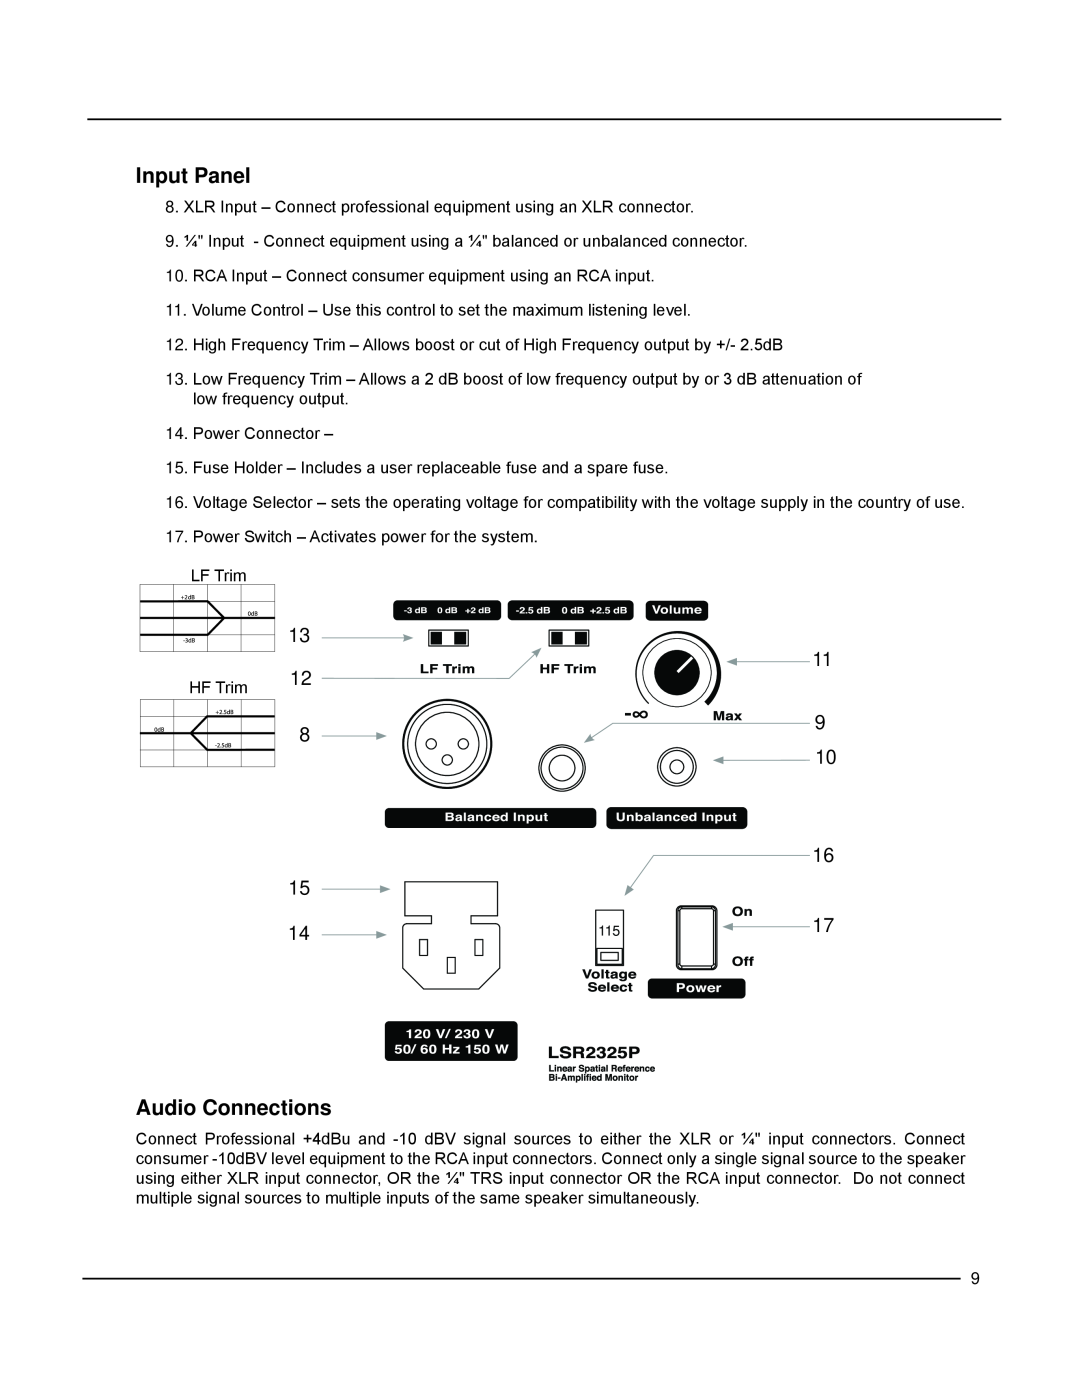 JBL LSR2328P owner manual Input Panel, Audio Connections 